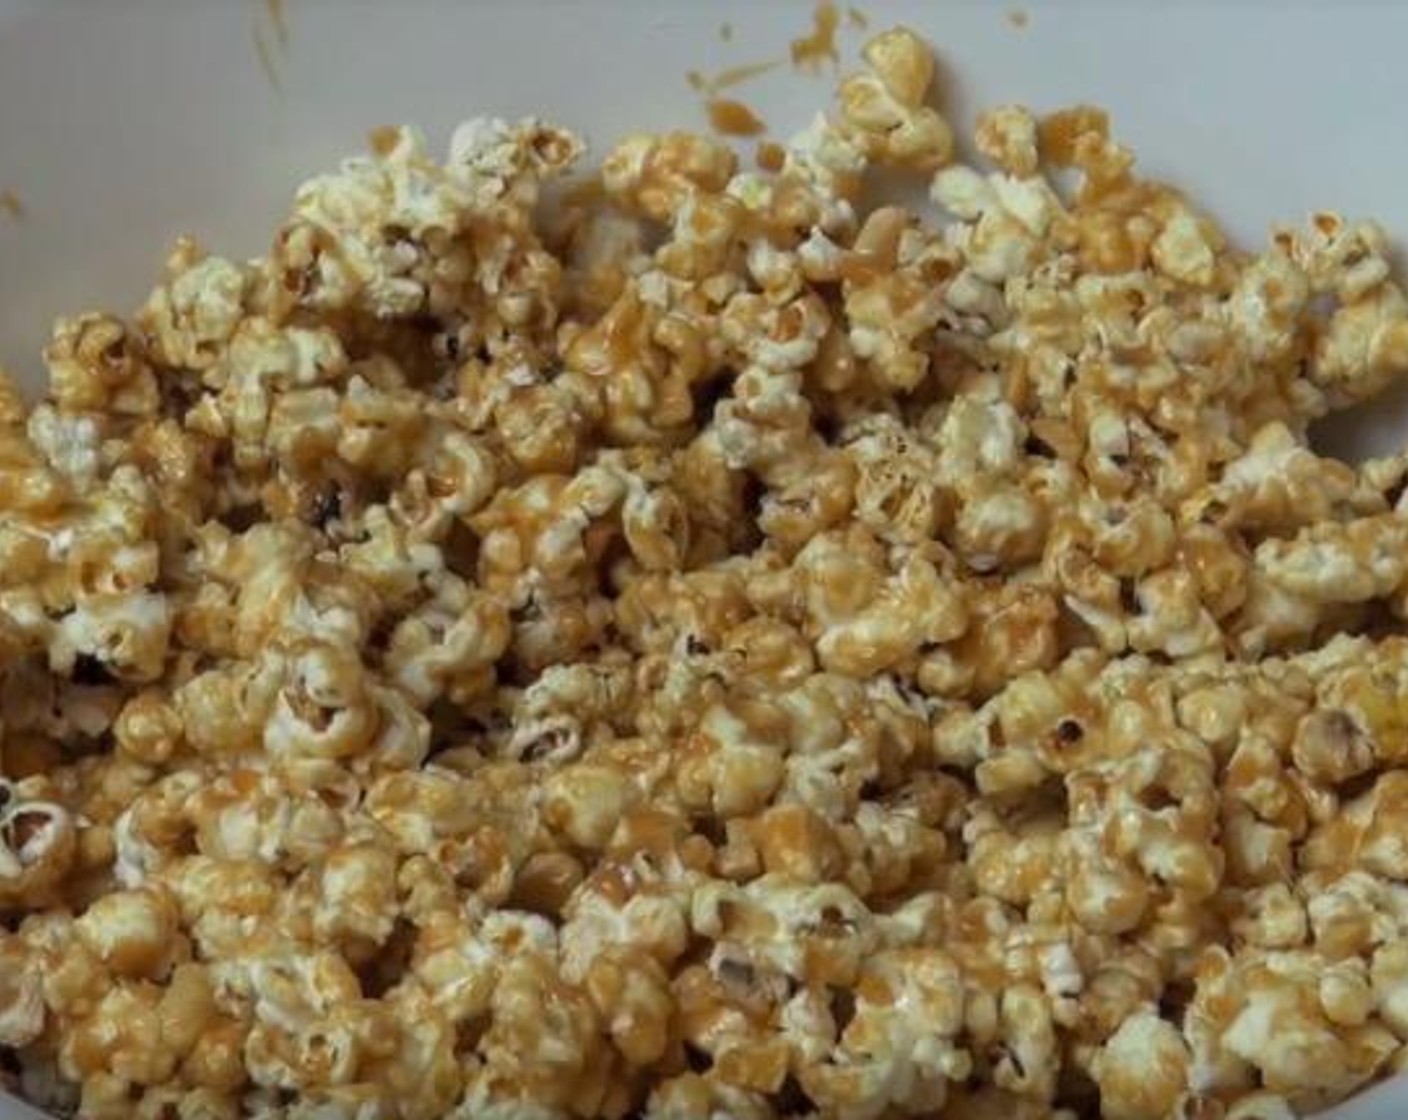 step 4 Remove caramel from heat and add Dry Roasted Peanuts (1 cup). Pour over popcorn and toss gently until all of the popcorn is coated.